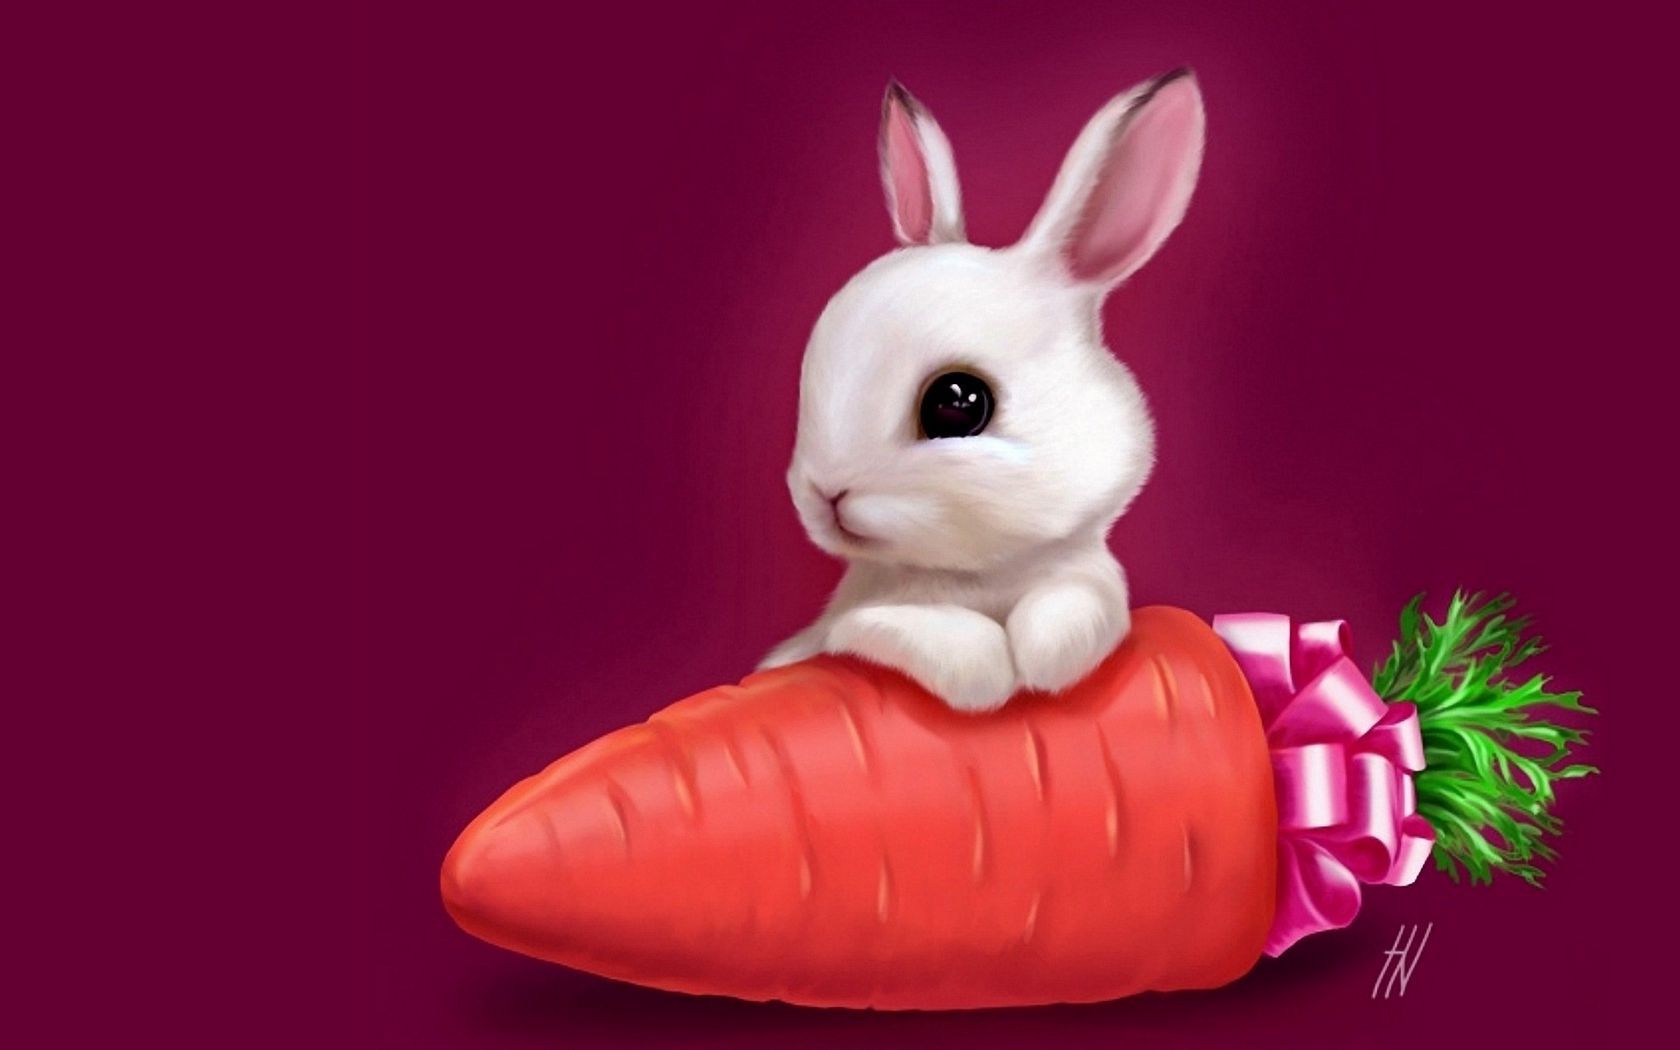 Download wallpaper 1680x1050 bunny, drawing, carrots, sweet widescreen 16:10 HD background